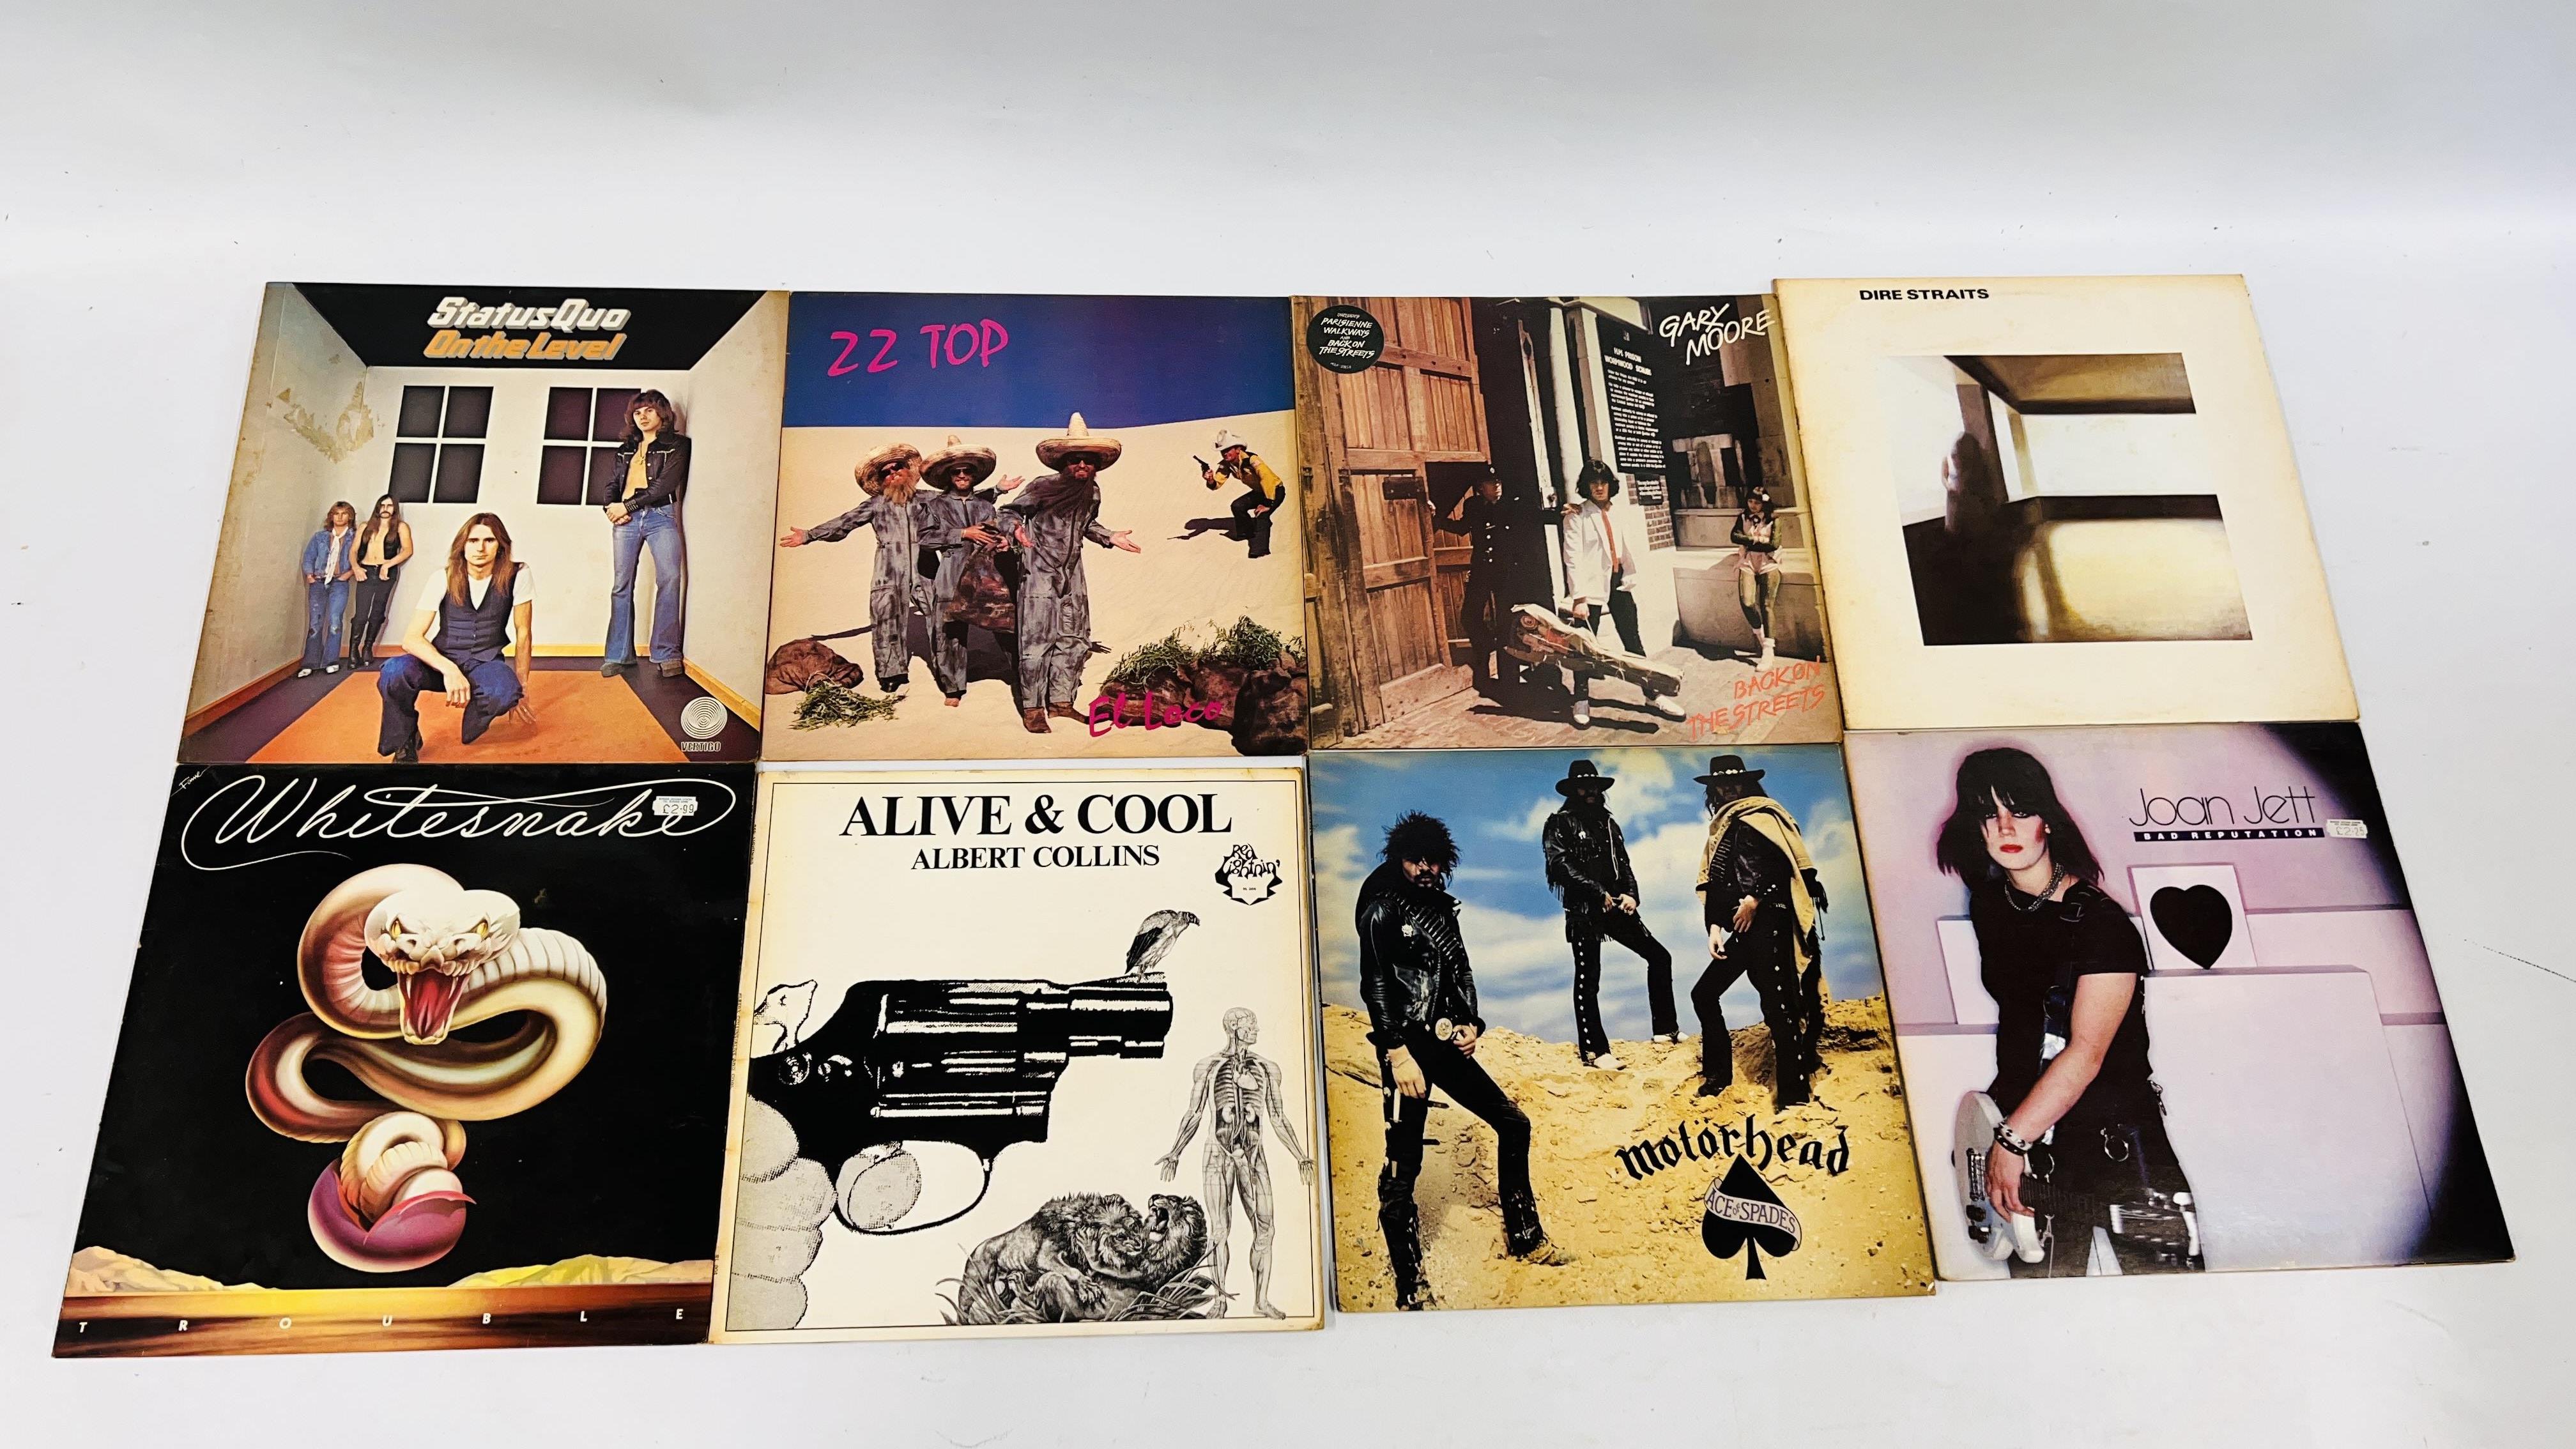 2 BOXES CONTAINING AN EXTENSIVE COLLECTION OF MAINLY 70'S AND 80'S ROCK MUSIC TO INCLUDE ROLLING - Image 9 of 20